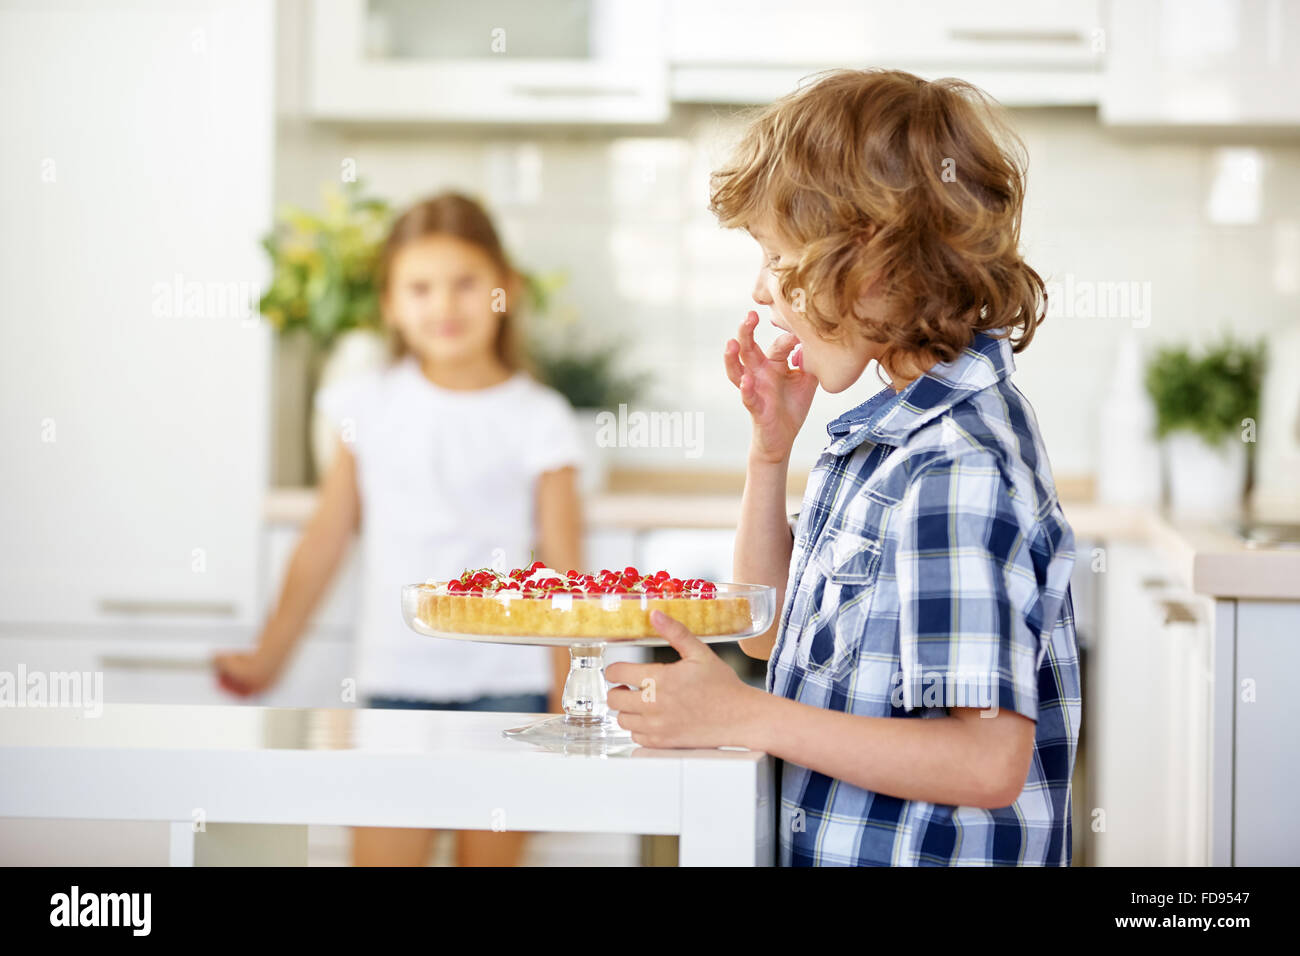 Boy tasting from fresh fruit cake with red currants in the kitchen Stock Photo